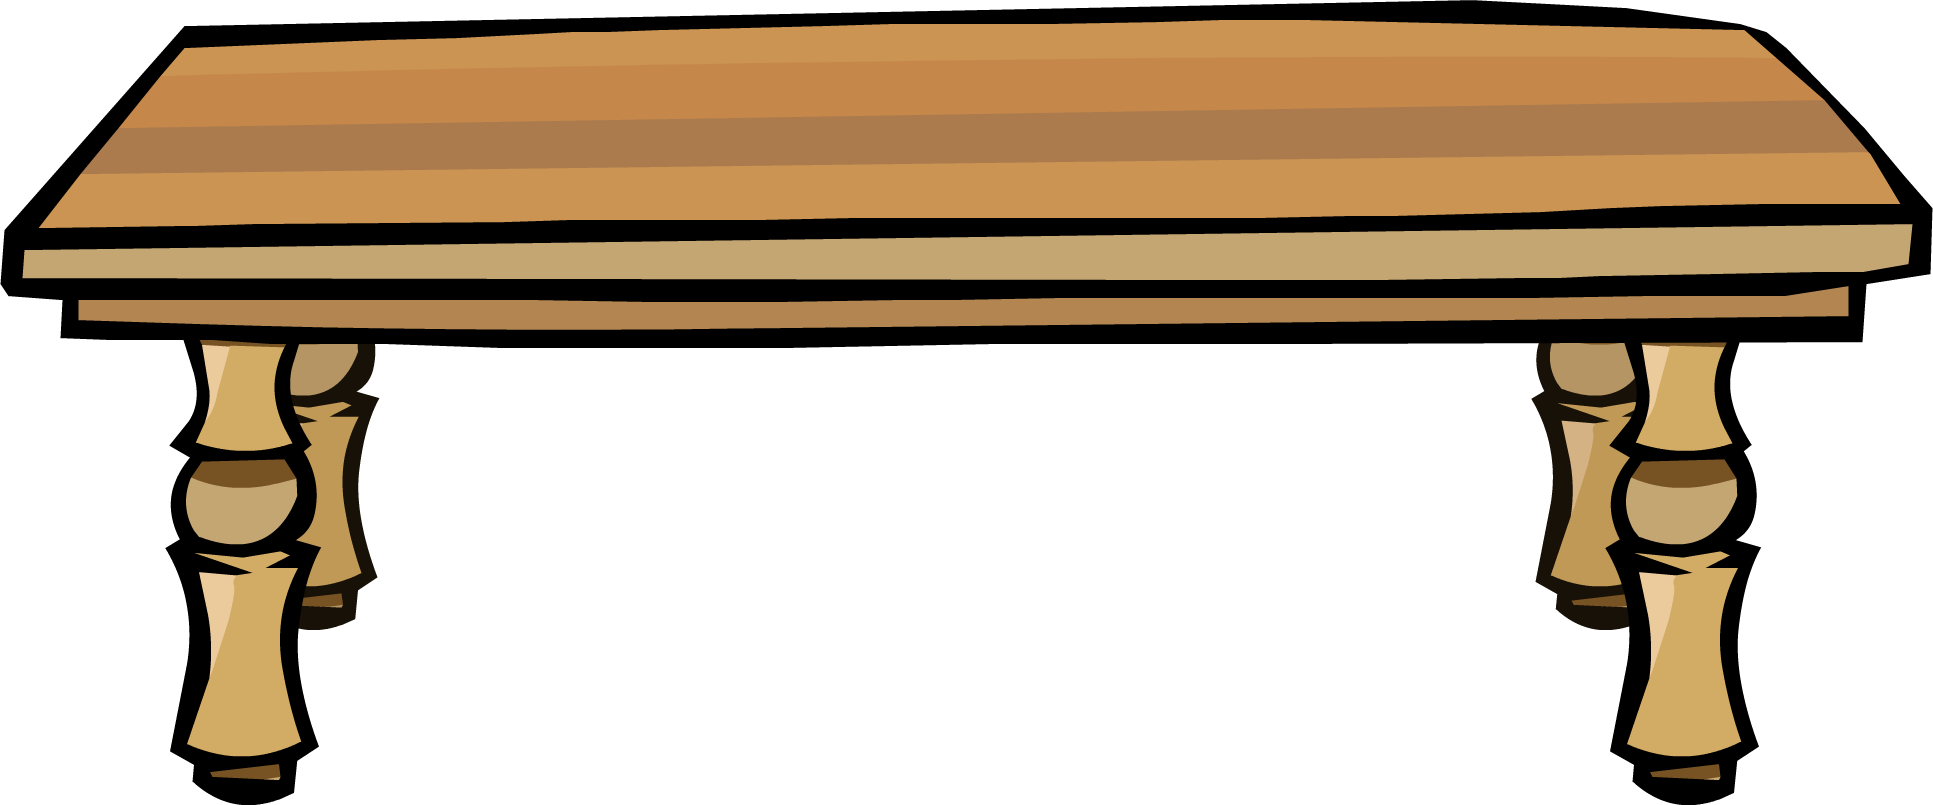 A Black Background With Brown And Tan Stripes